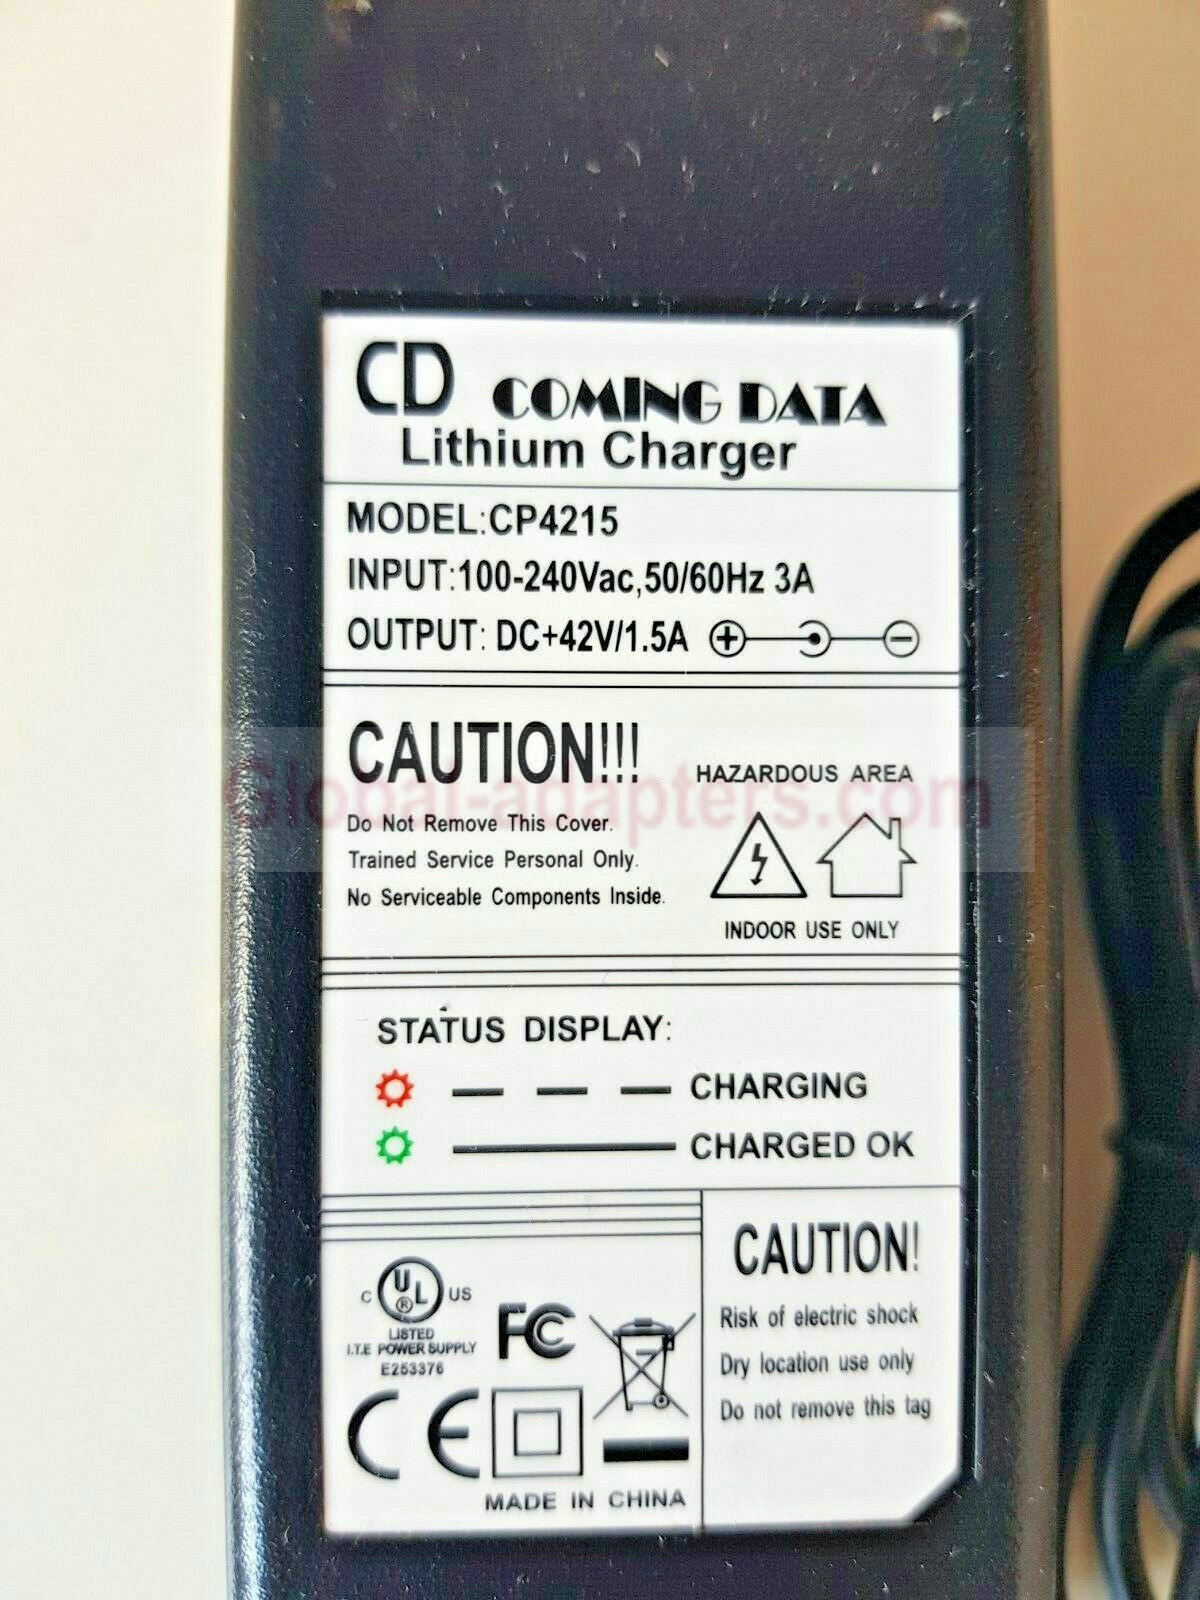 NEW 42V DC 1.5A COMING DATA LITHIUM CHARGER CP4215 CD-SCOOTER CHARGER BARREL CONNECT - Click Image to Close